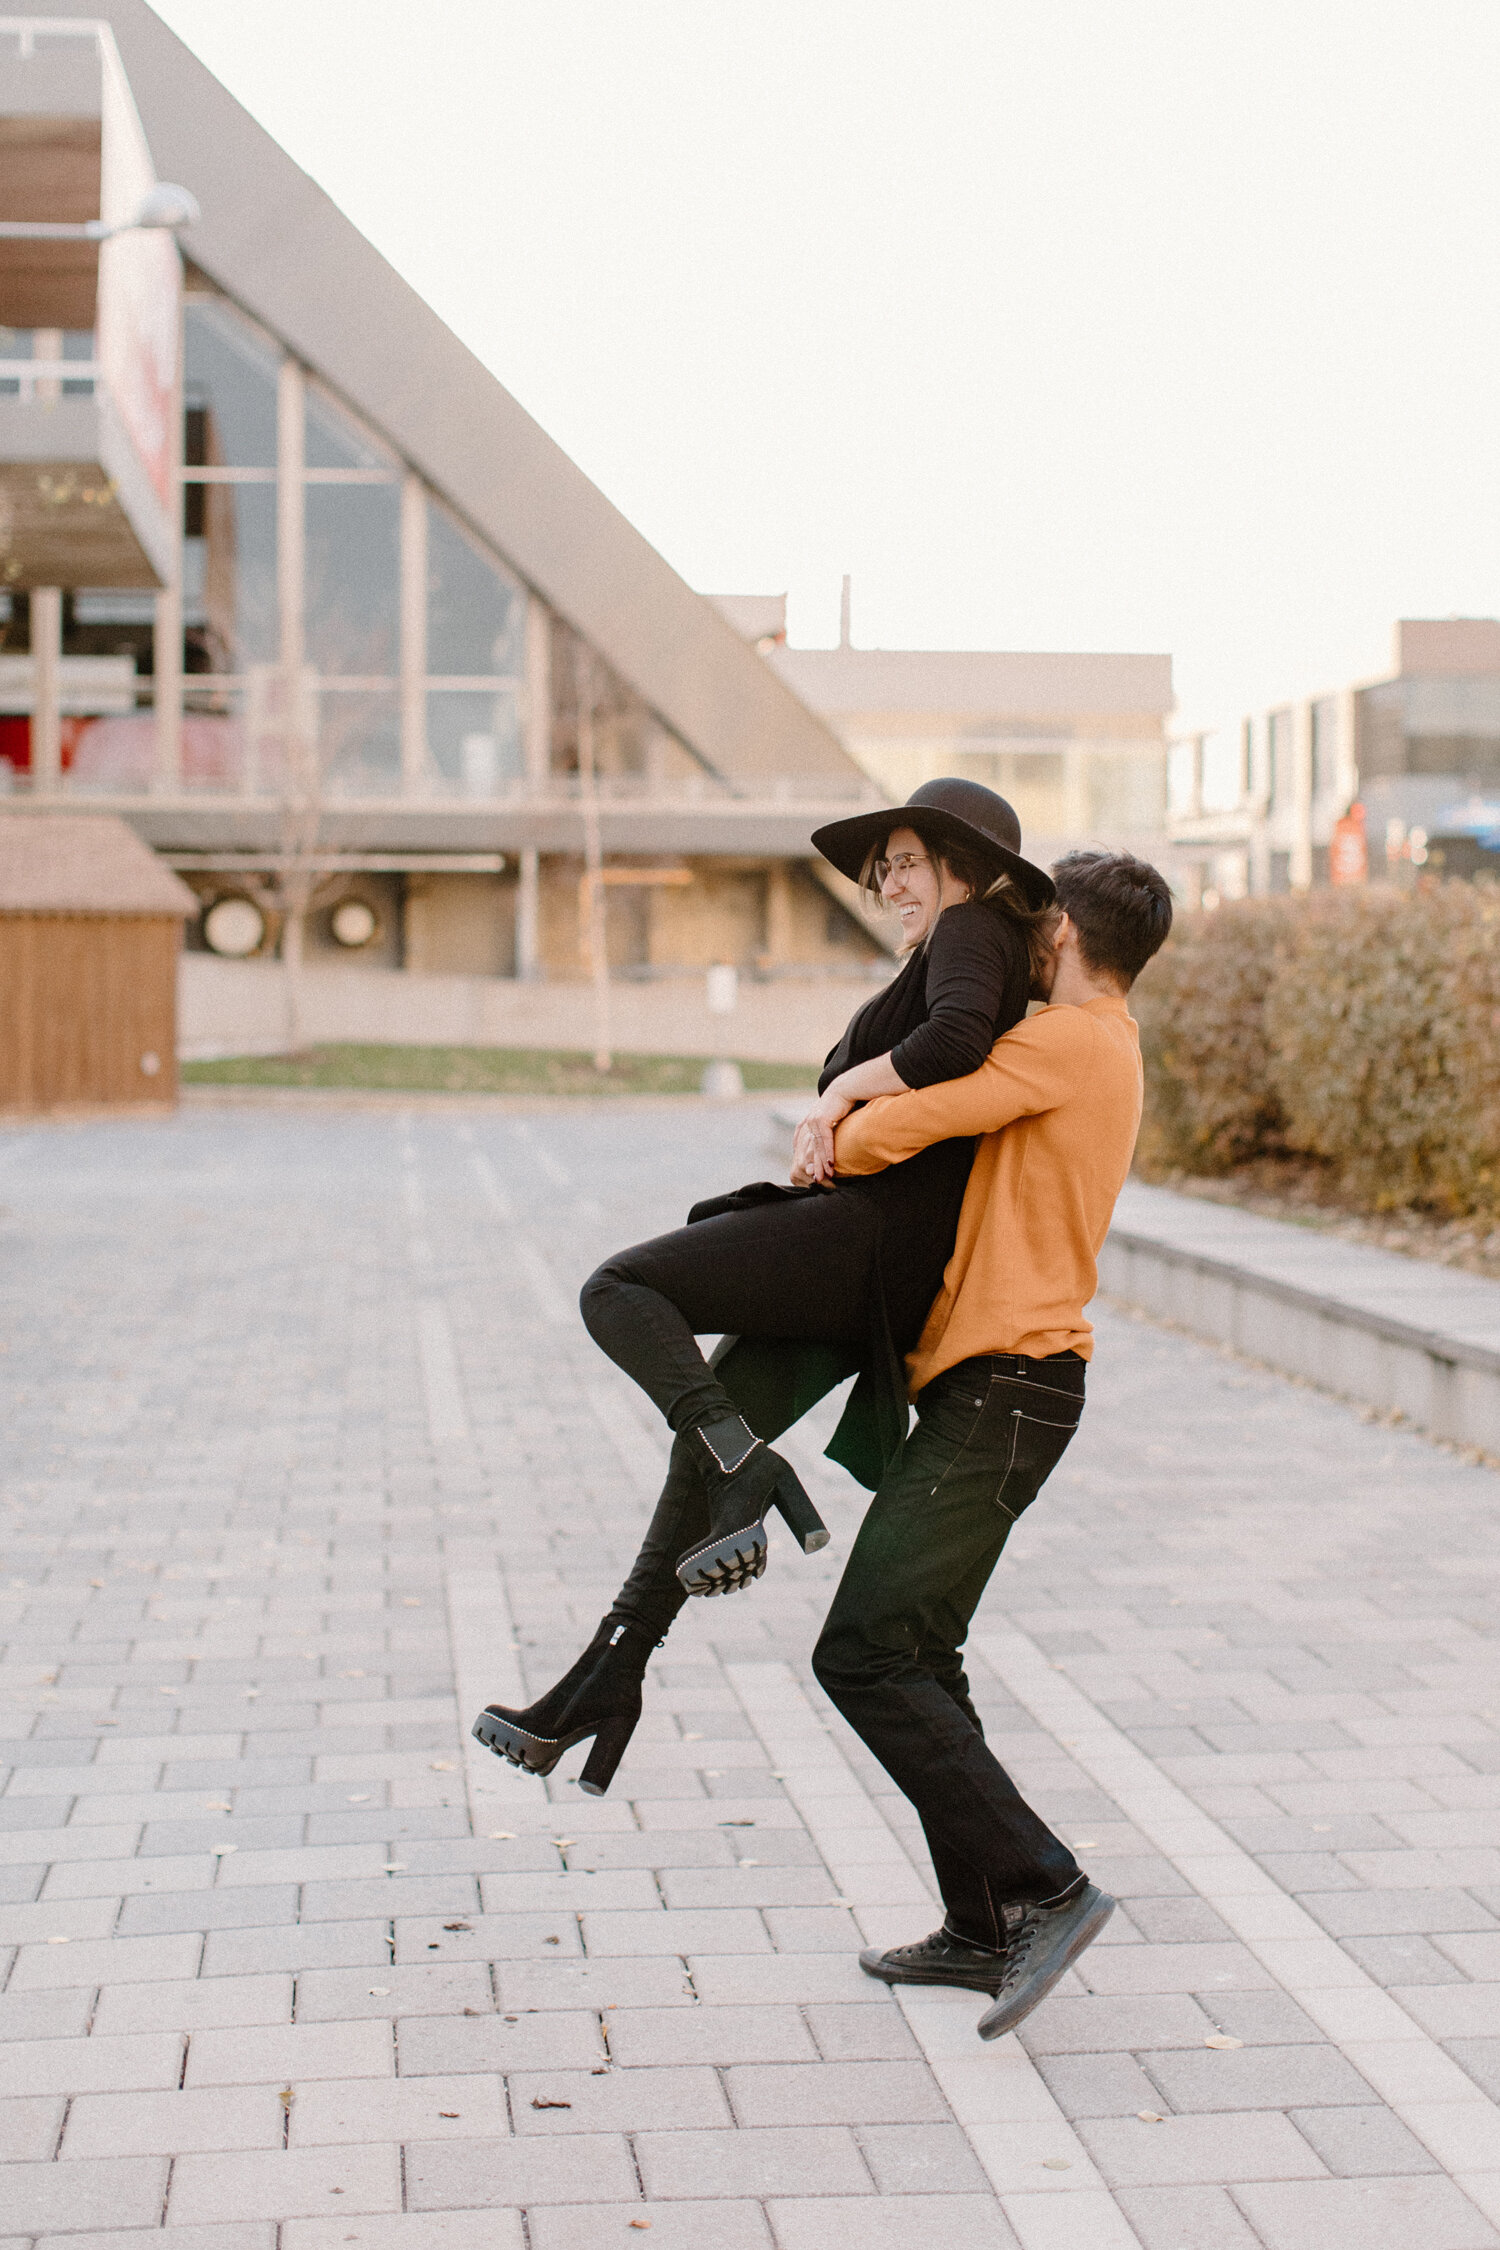  During this couples session in Ontario, Canada, Chelsea Mason Photography captures this man holding and spinning his fiance. ontario canada engagement photographer couples photographs playful engagement session black and orange couples outfit colors